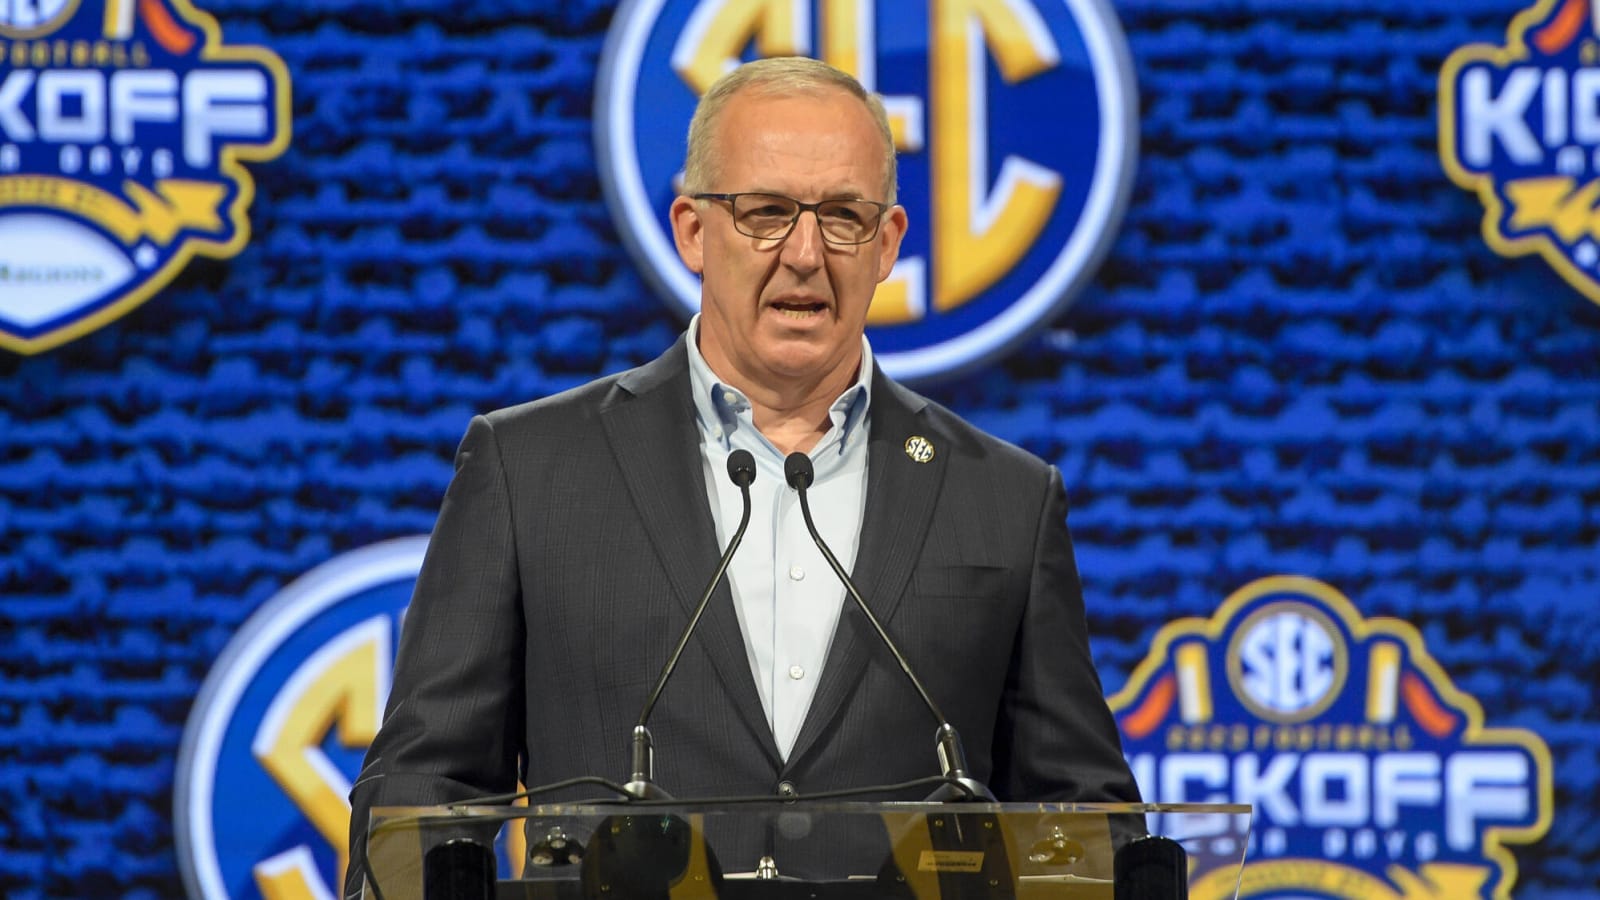 SEC Content As 16-Team ‘Super-Conference,’ Says Commissioner